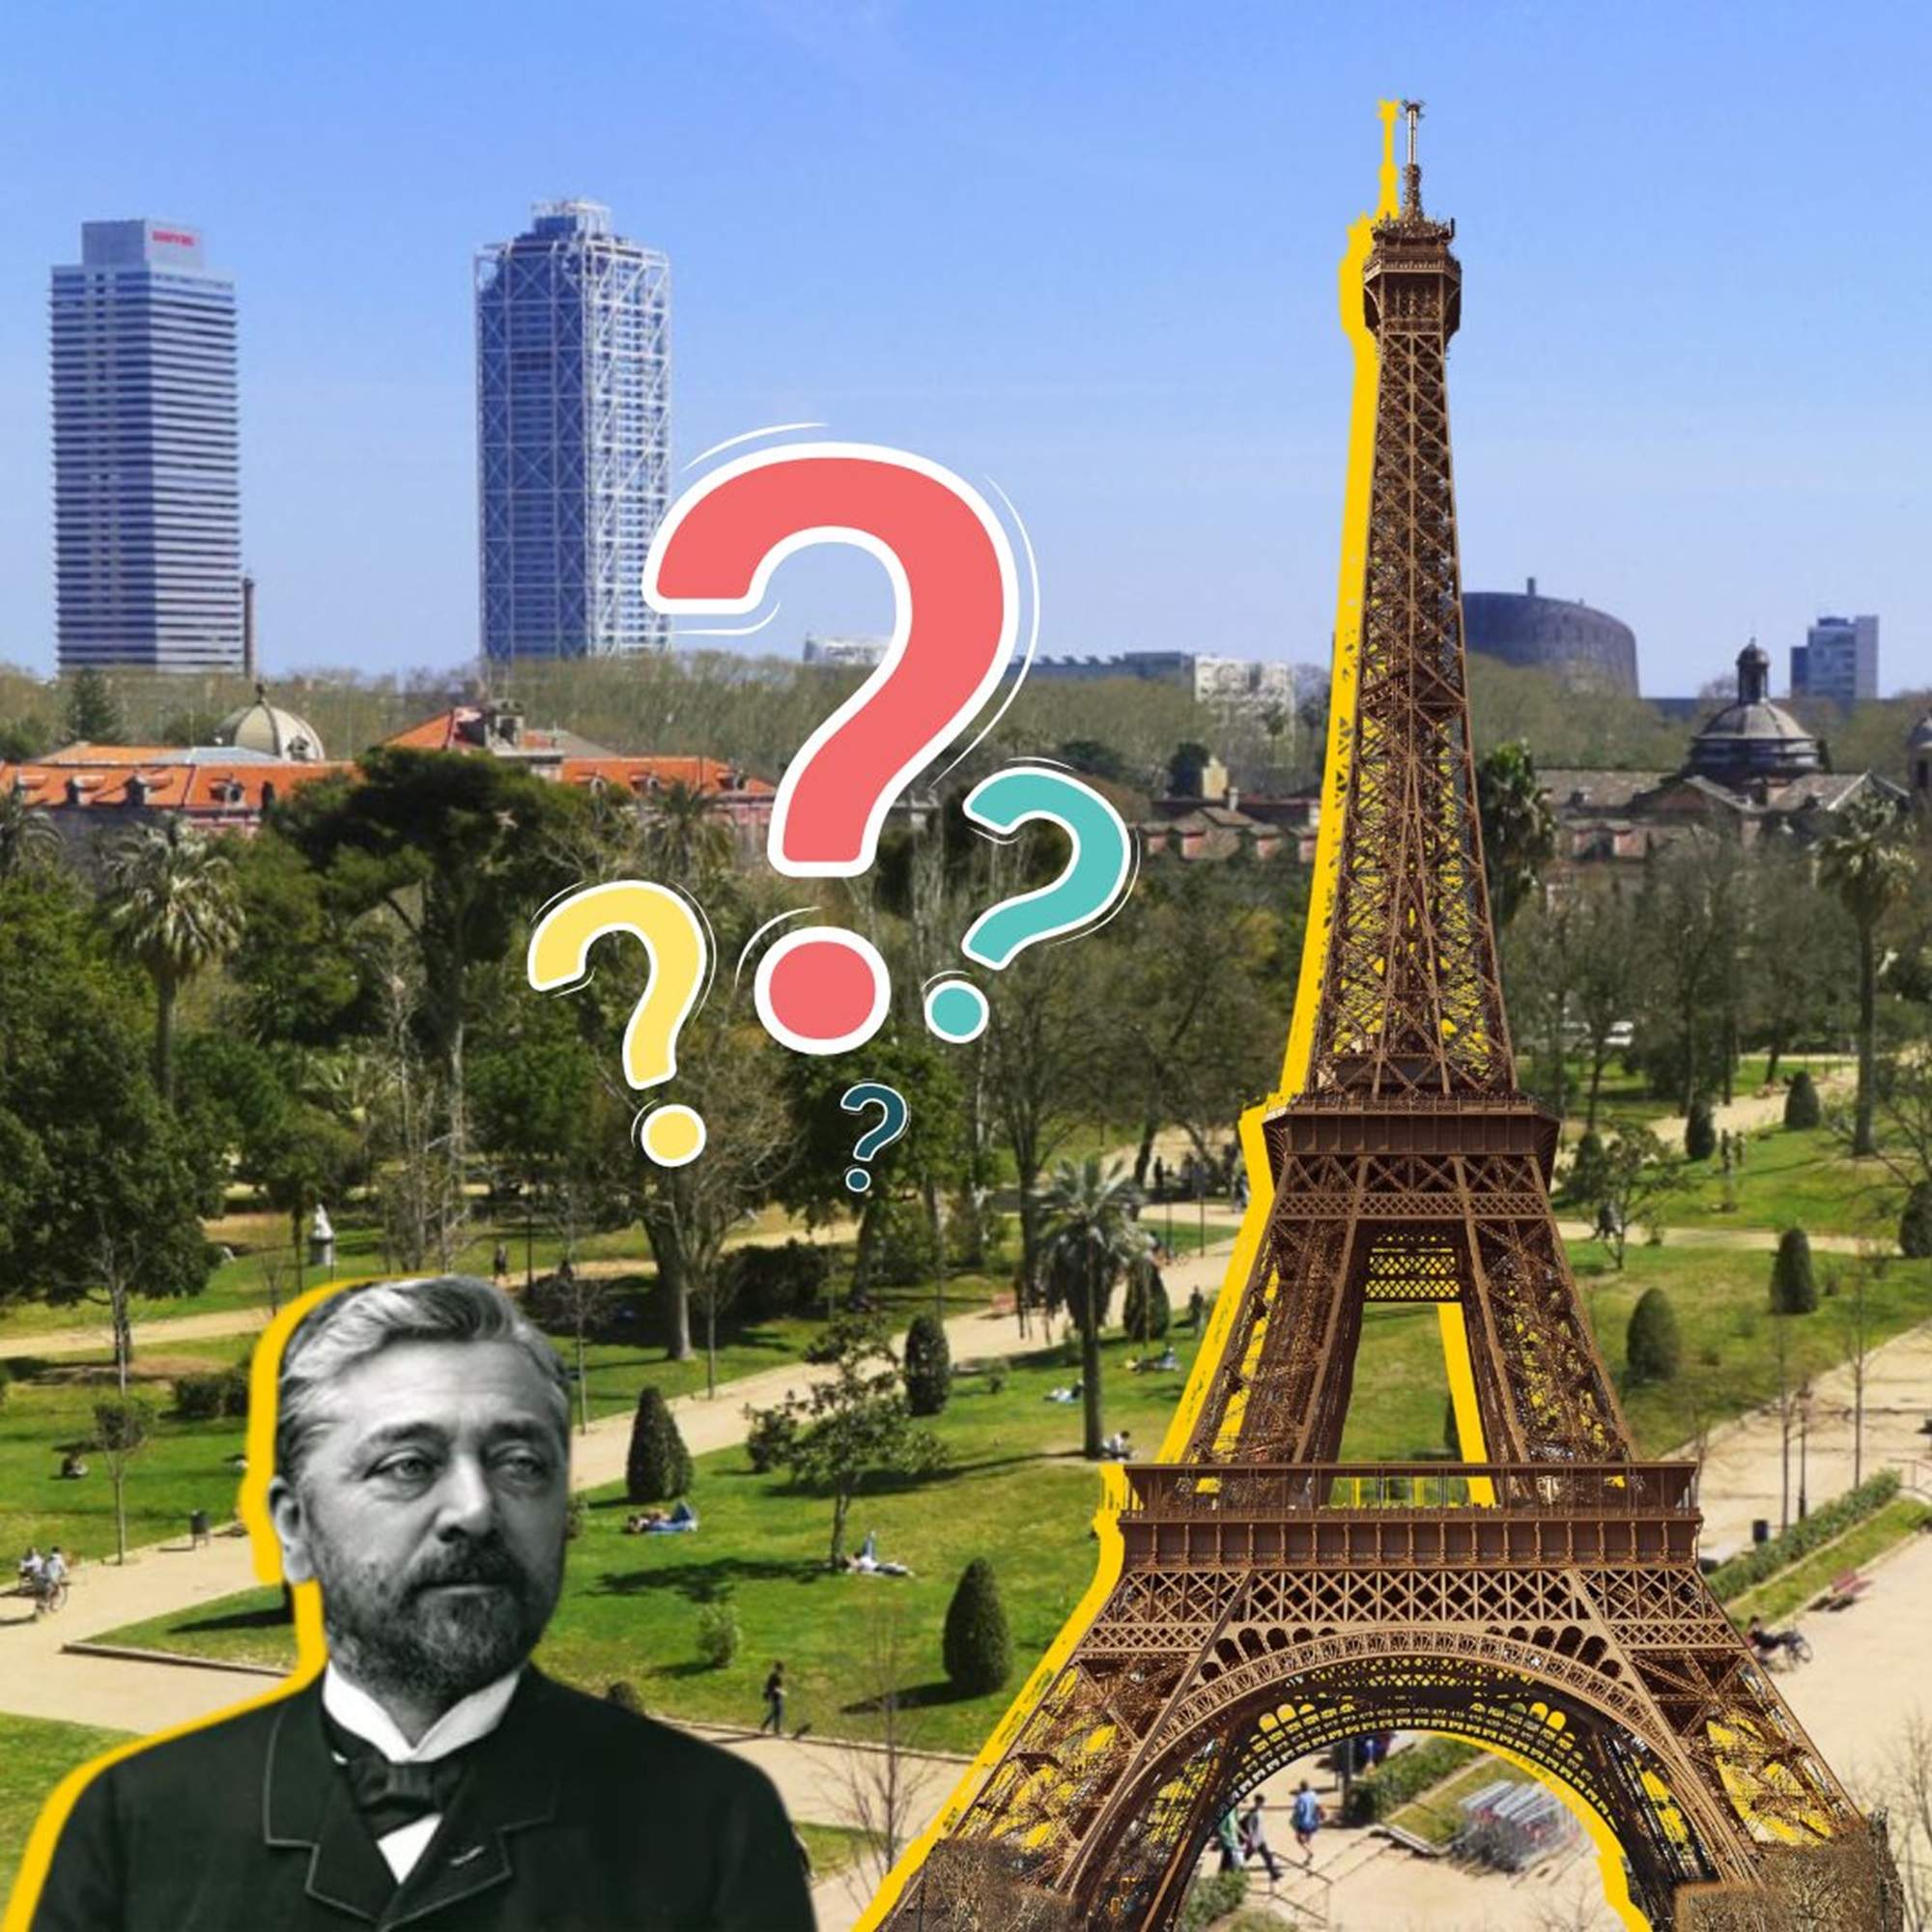 The reality behind the urban legend: Barcelona rejected three proposals for Eiffel-style towers